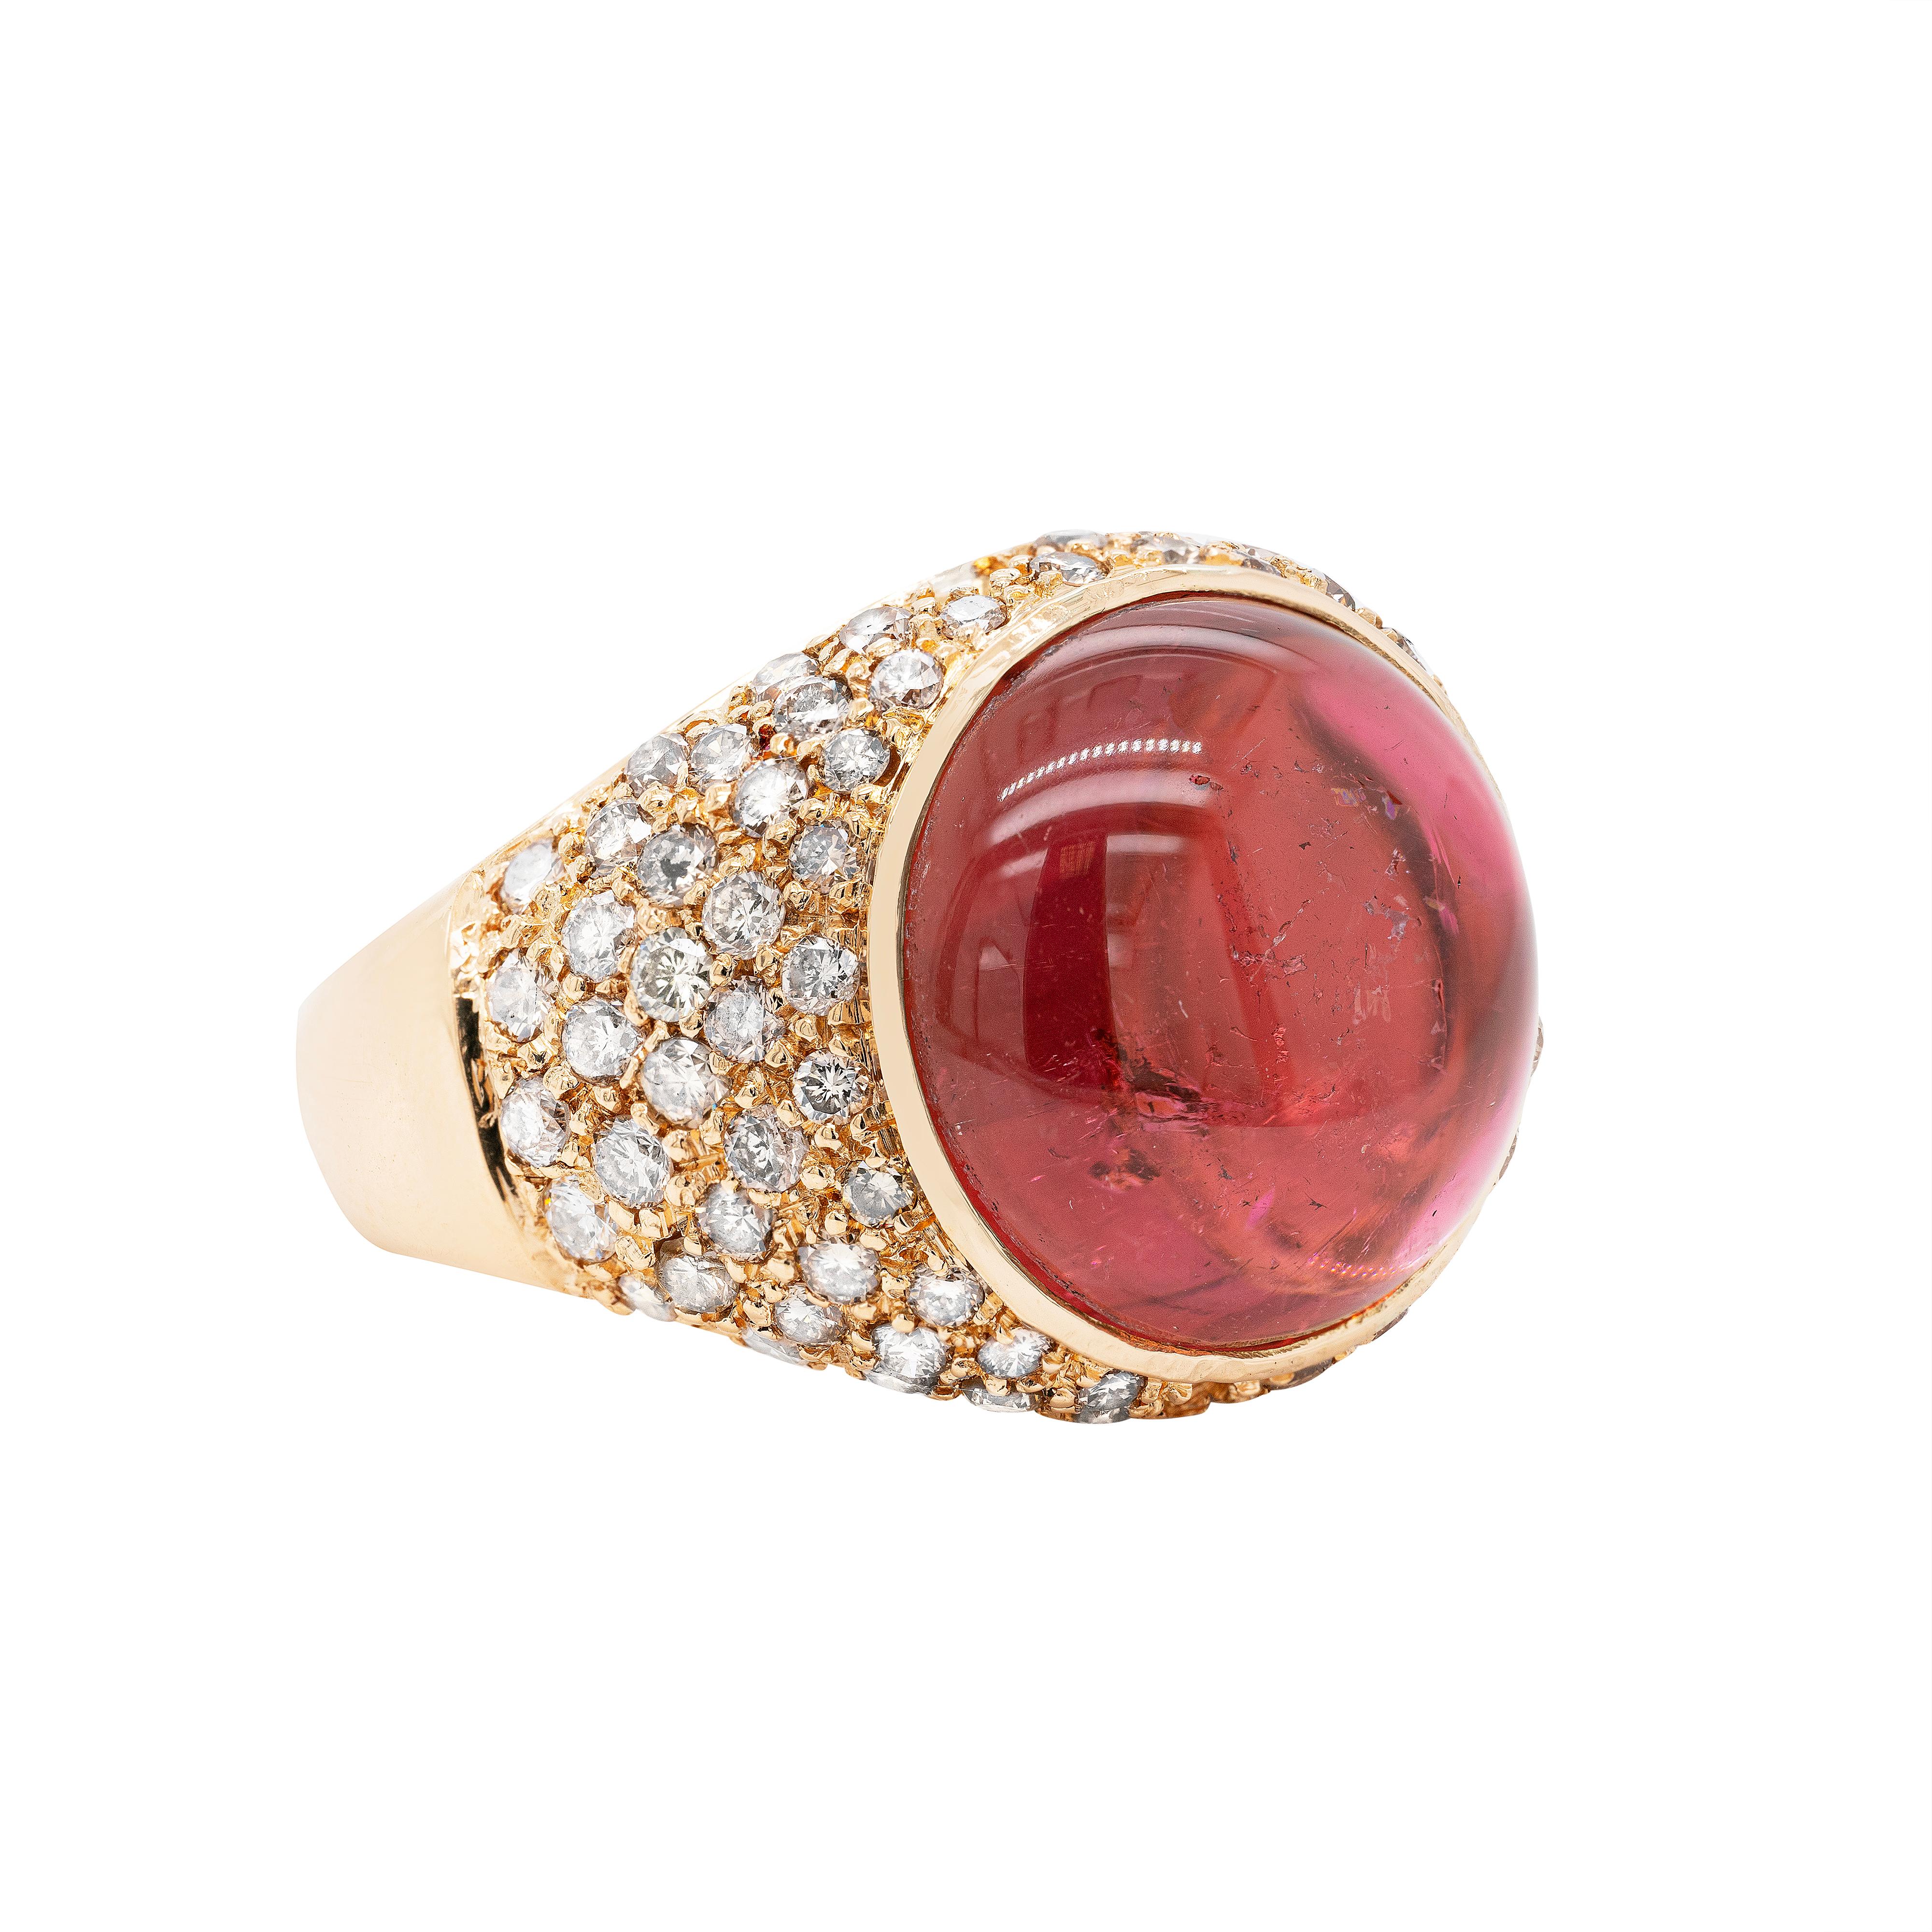 Bold and beautiful, this cocktail ring features a vibrant cabochon tourmaline measuring 13.8mm, rub-over set in the centre in an 18 carat yellow gold open back mount. The gorgeous piece is further pavé set with fine quality round brilliant cut